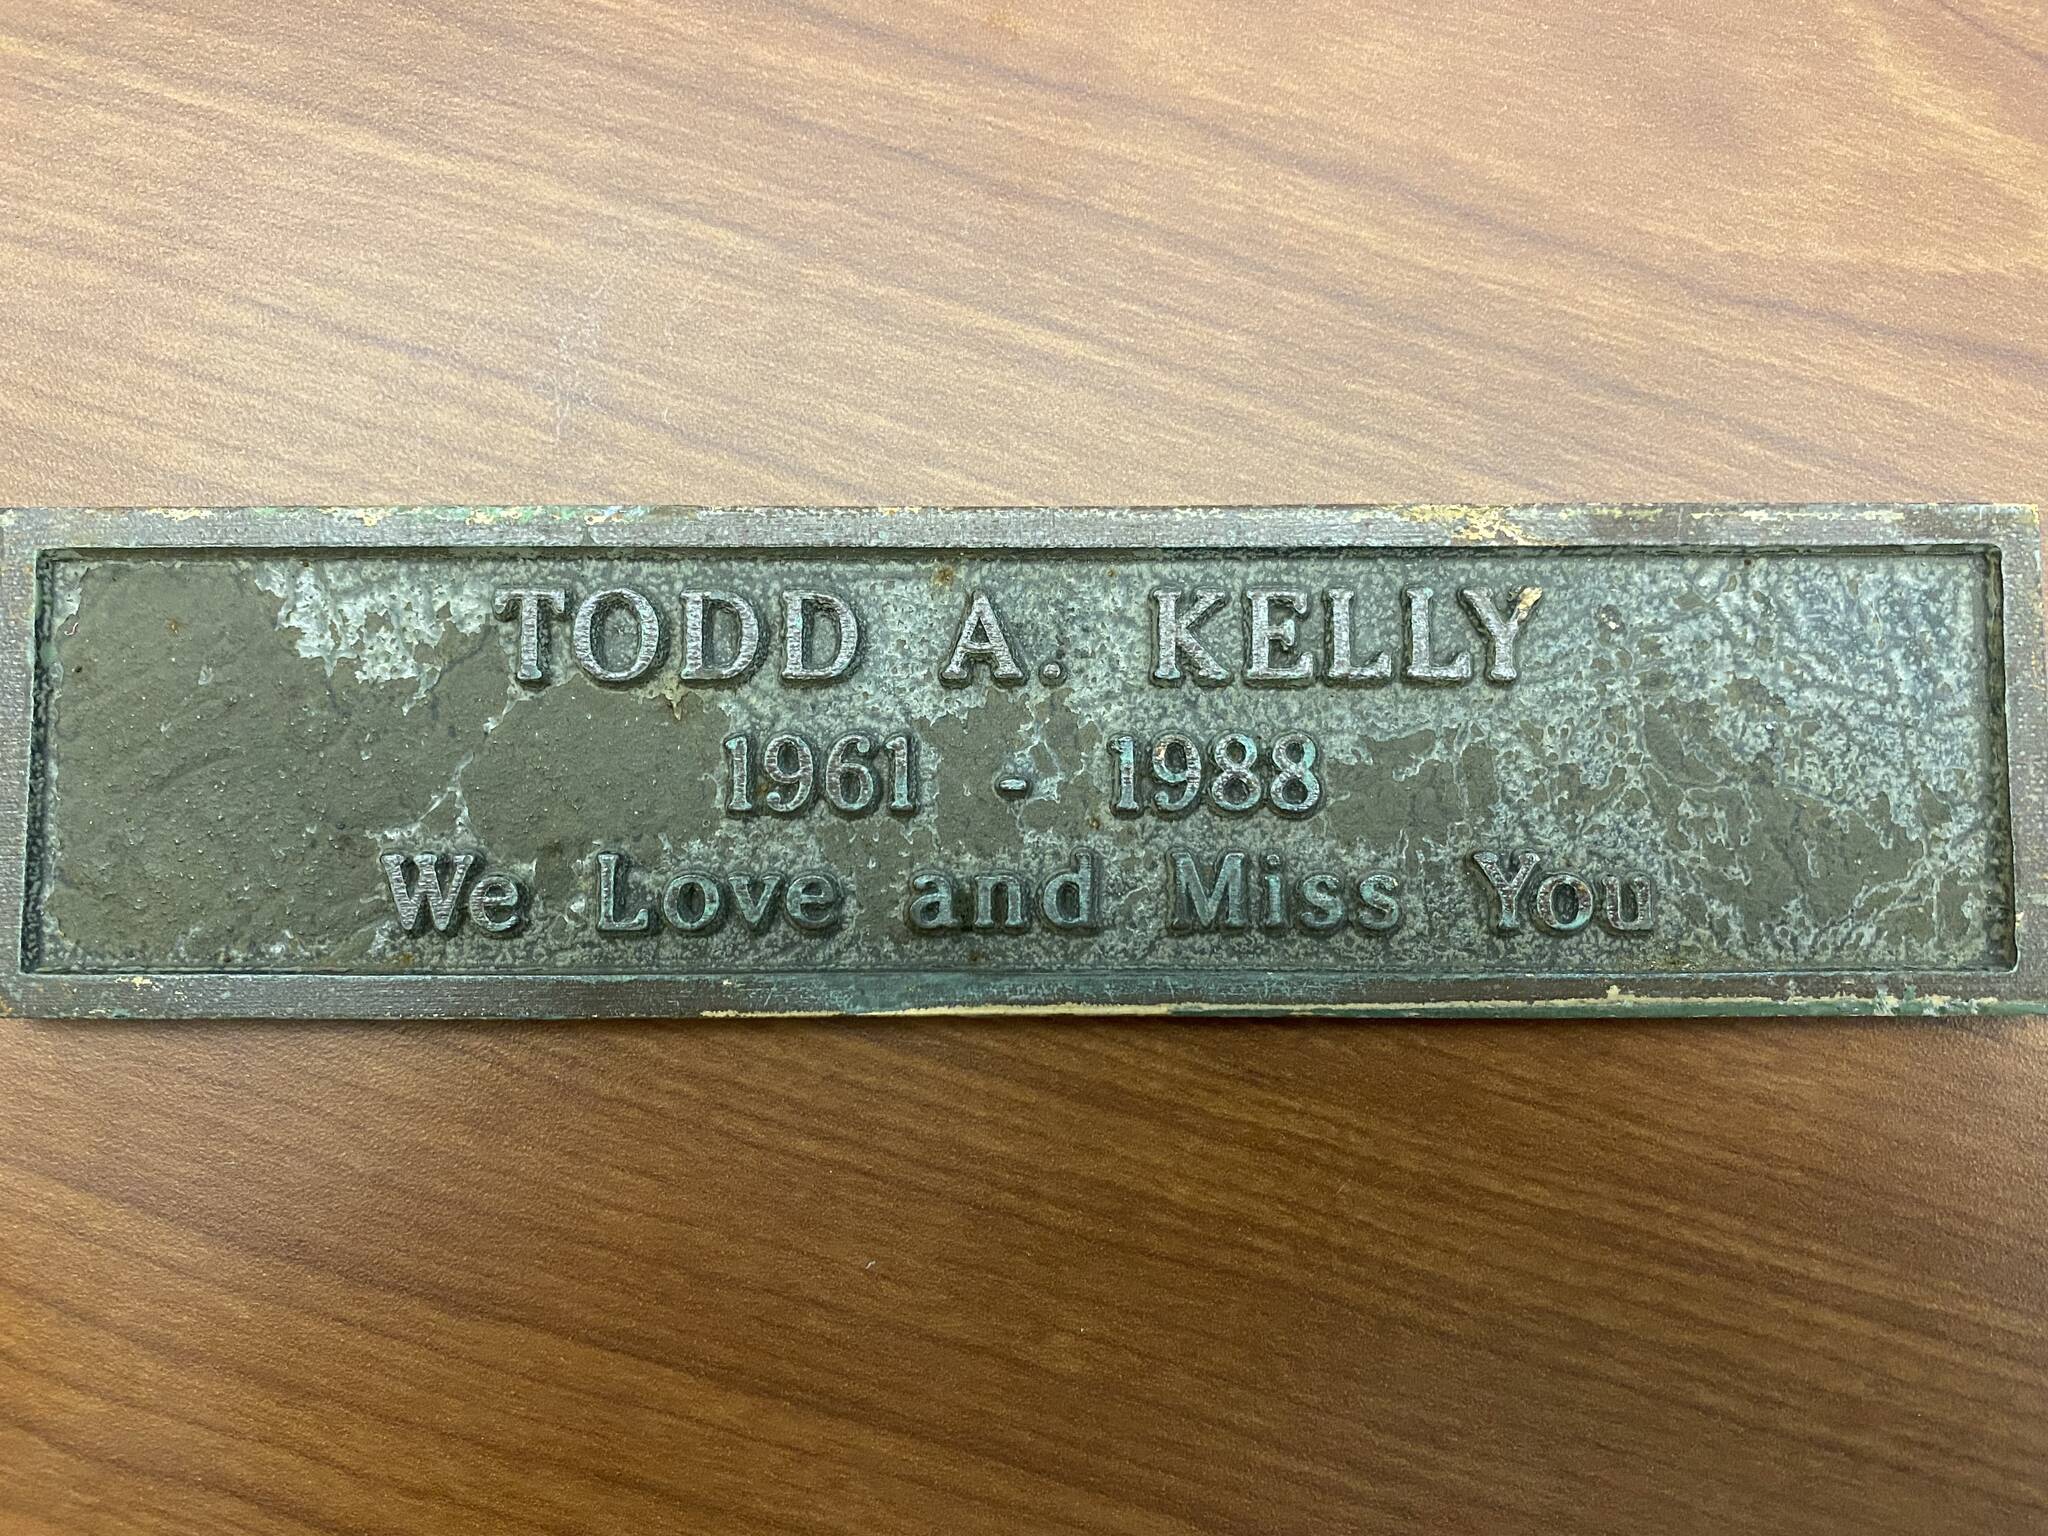 Photo provided
This plaque was removed from Deception Pass bridge during painting. Anyone with information about how to reach the family of Todd A. Kelly should reach out to Jason Armstrong.